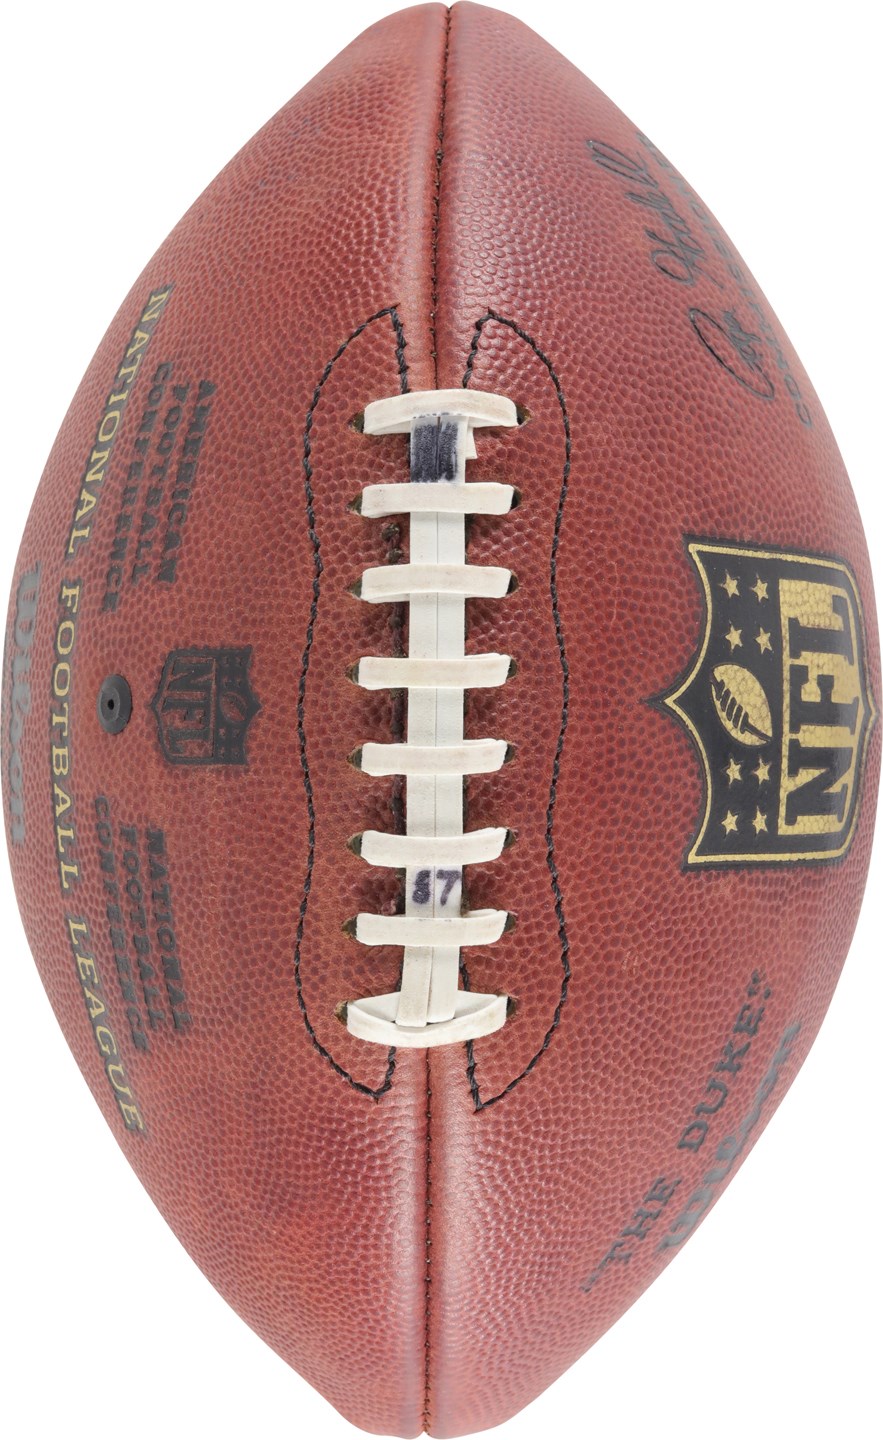 Ron Gronkowski Game Used Football Given to Friend